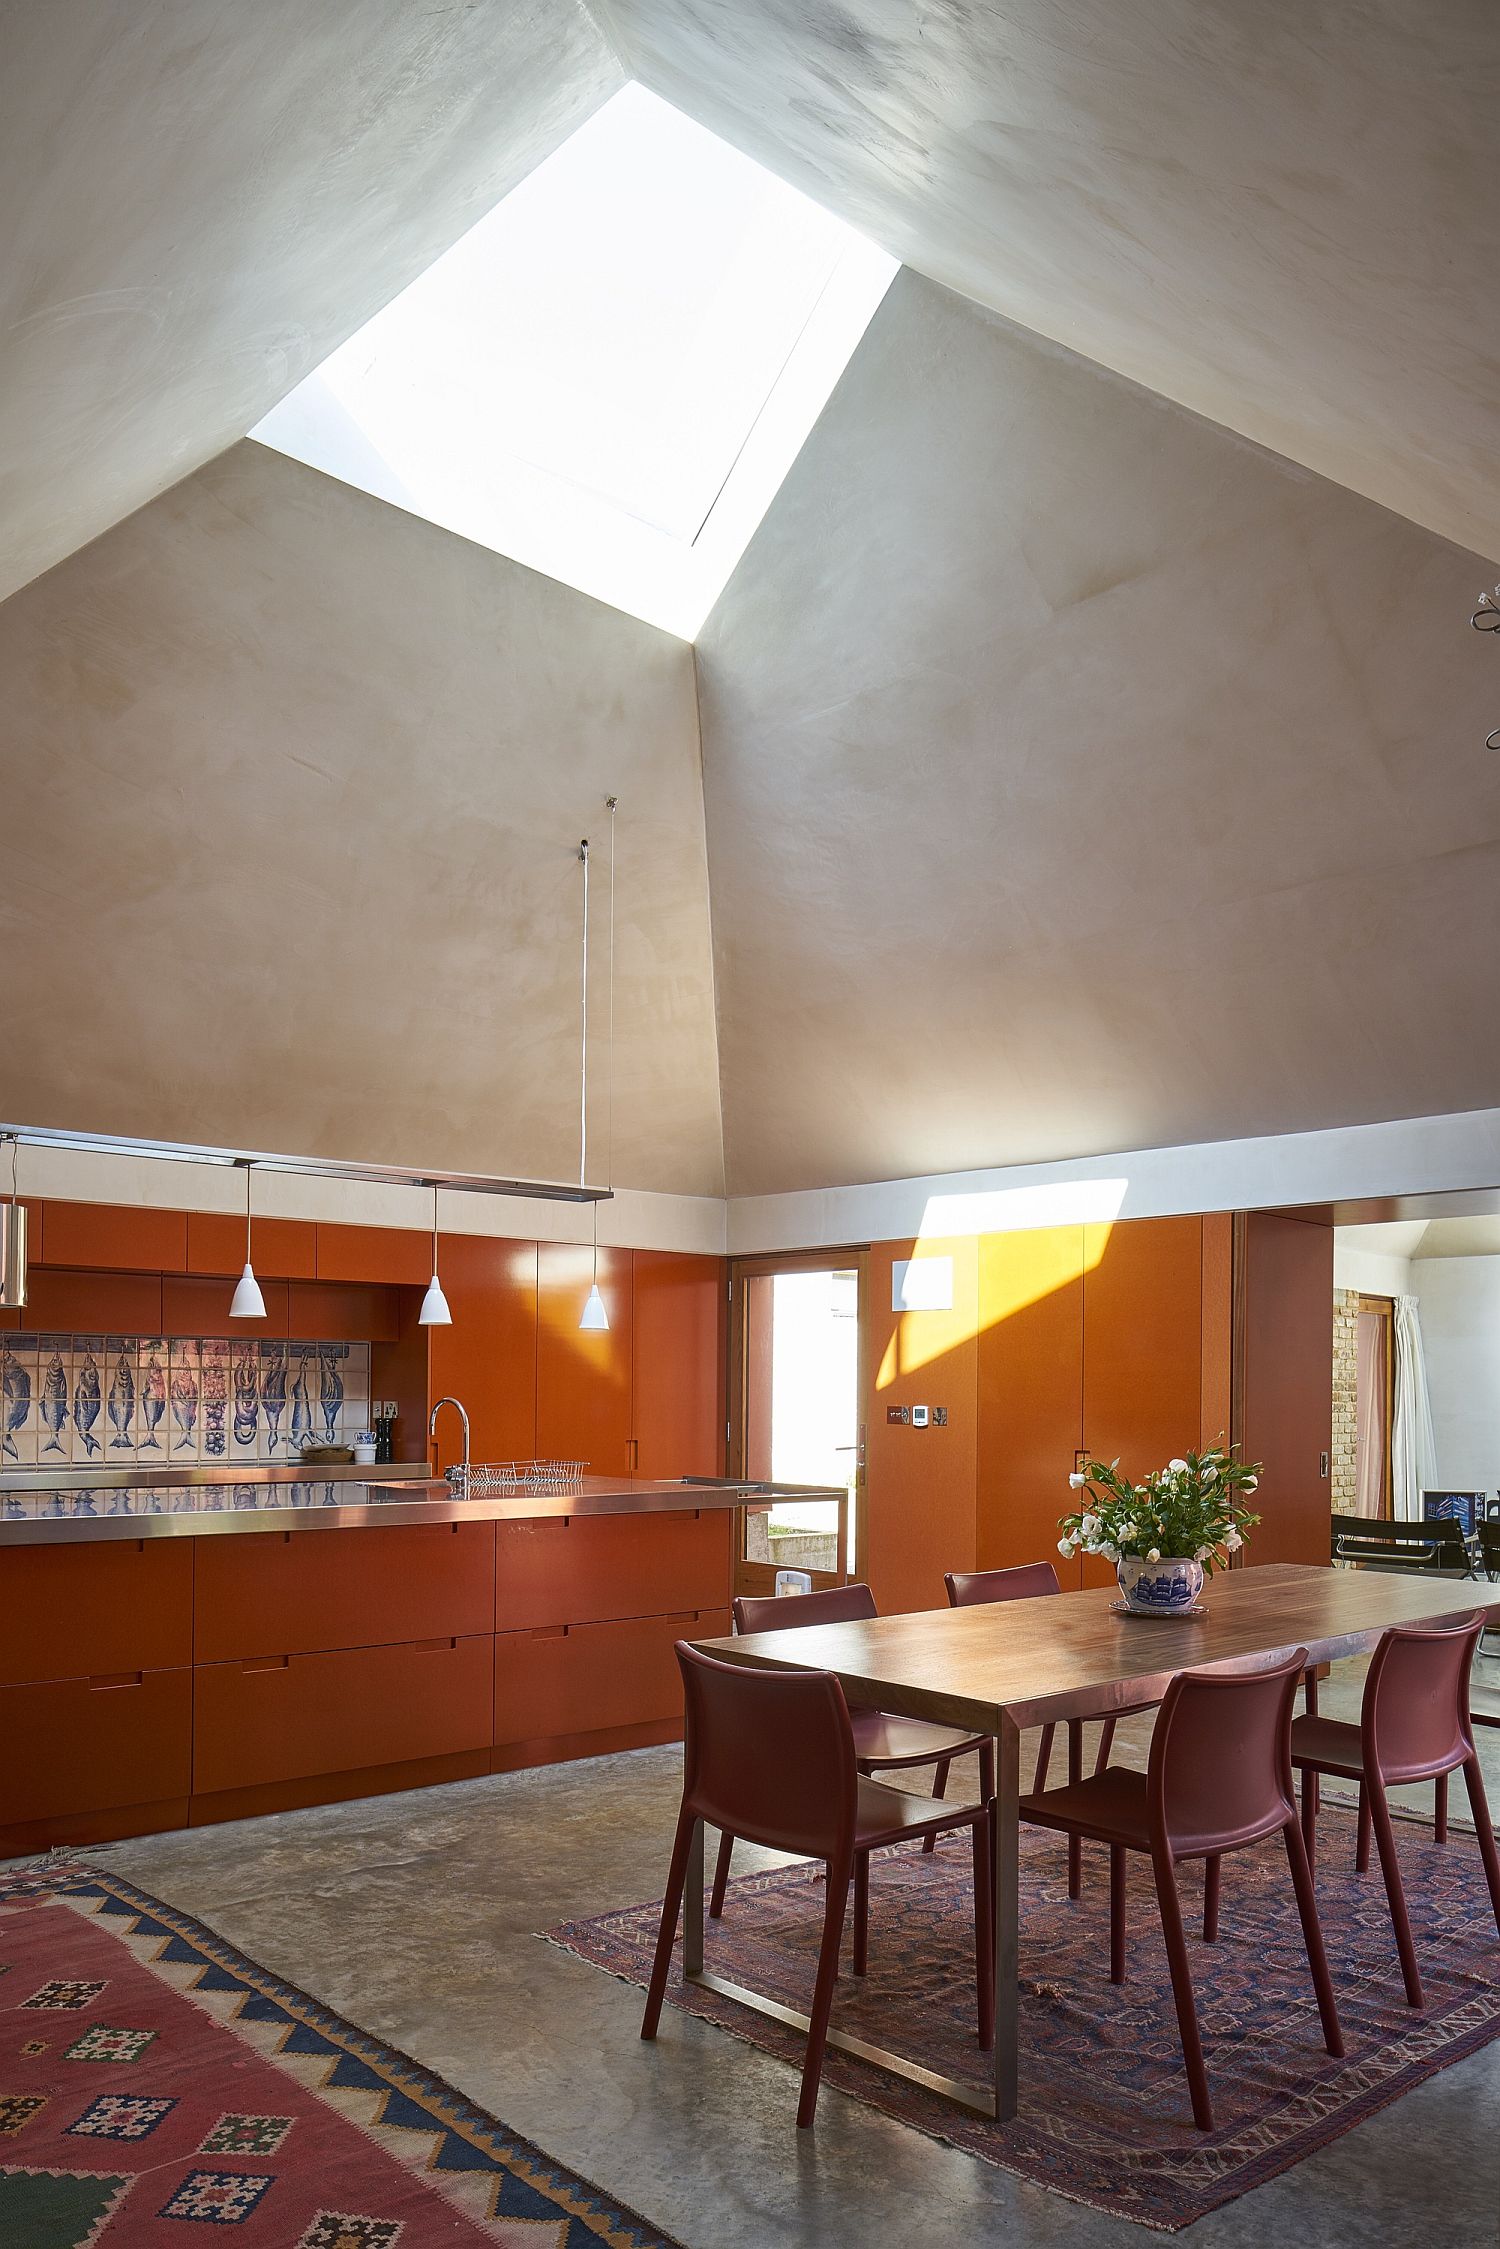 Awesome ceiling design and skylight steal the show in this orangy home